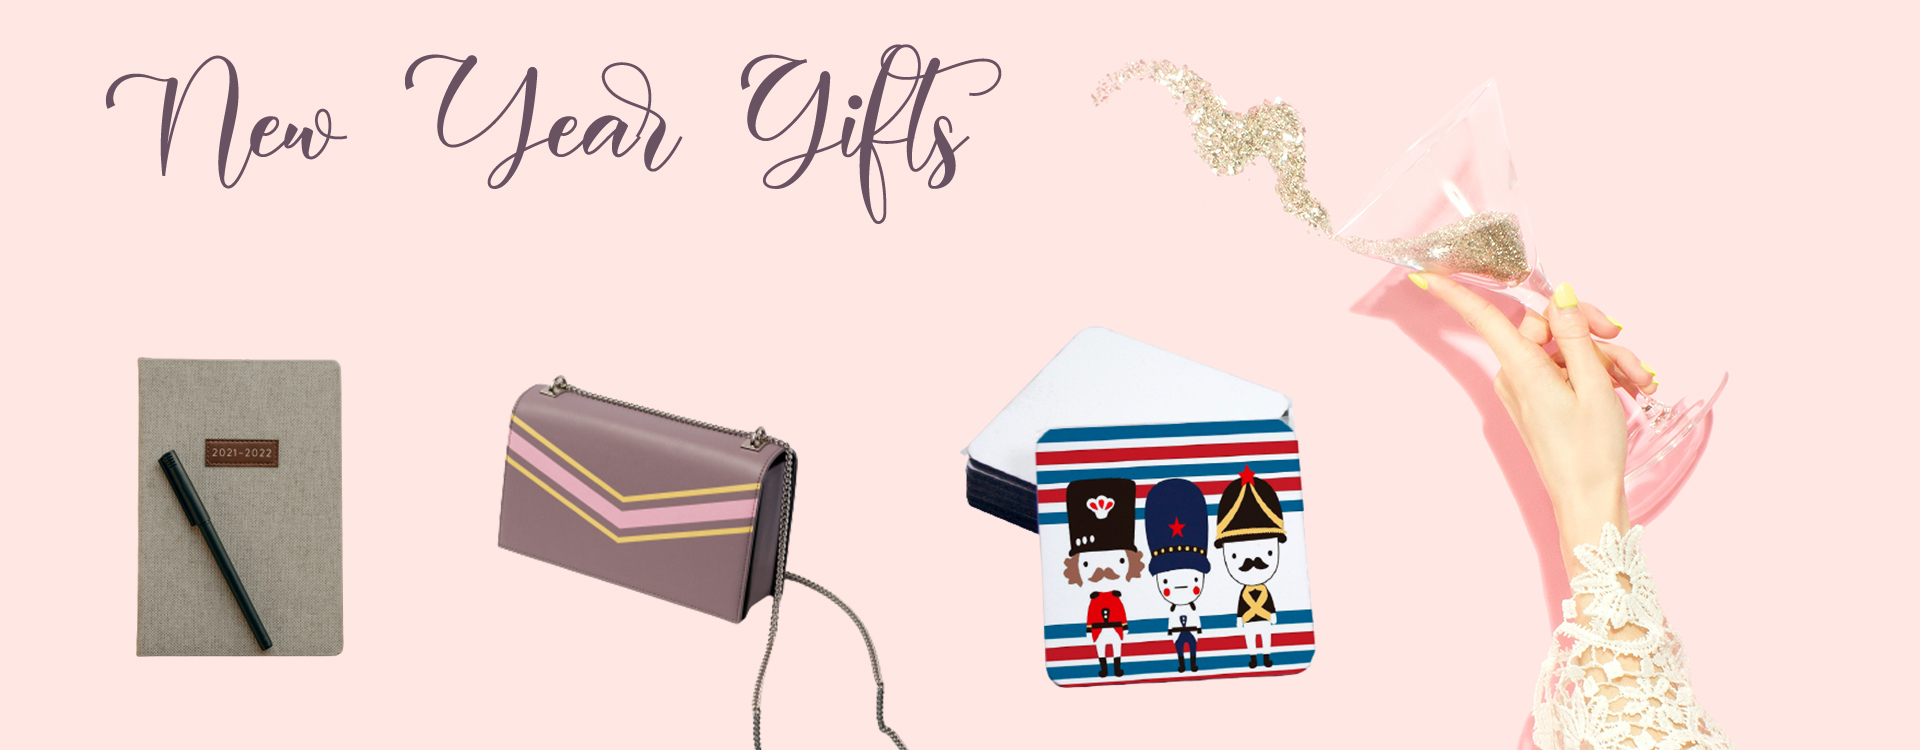 How to select some best new year gifts for your family and friend